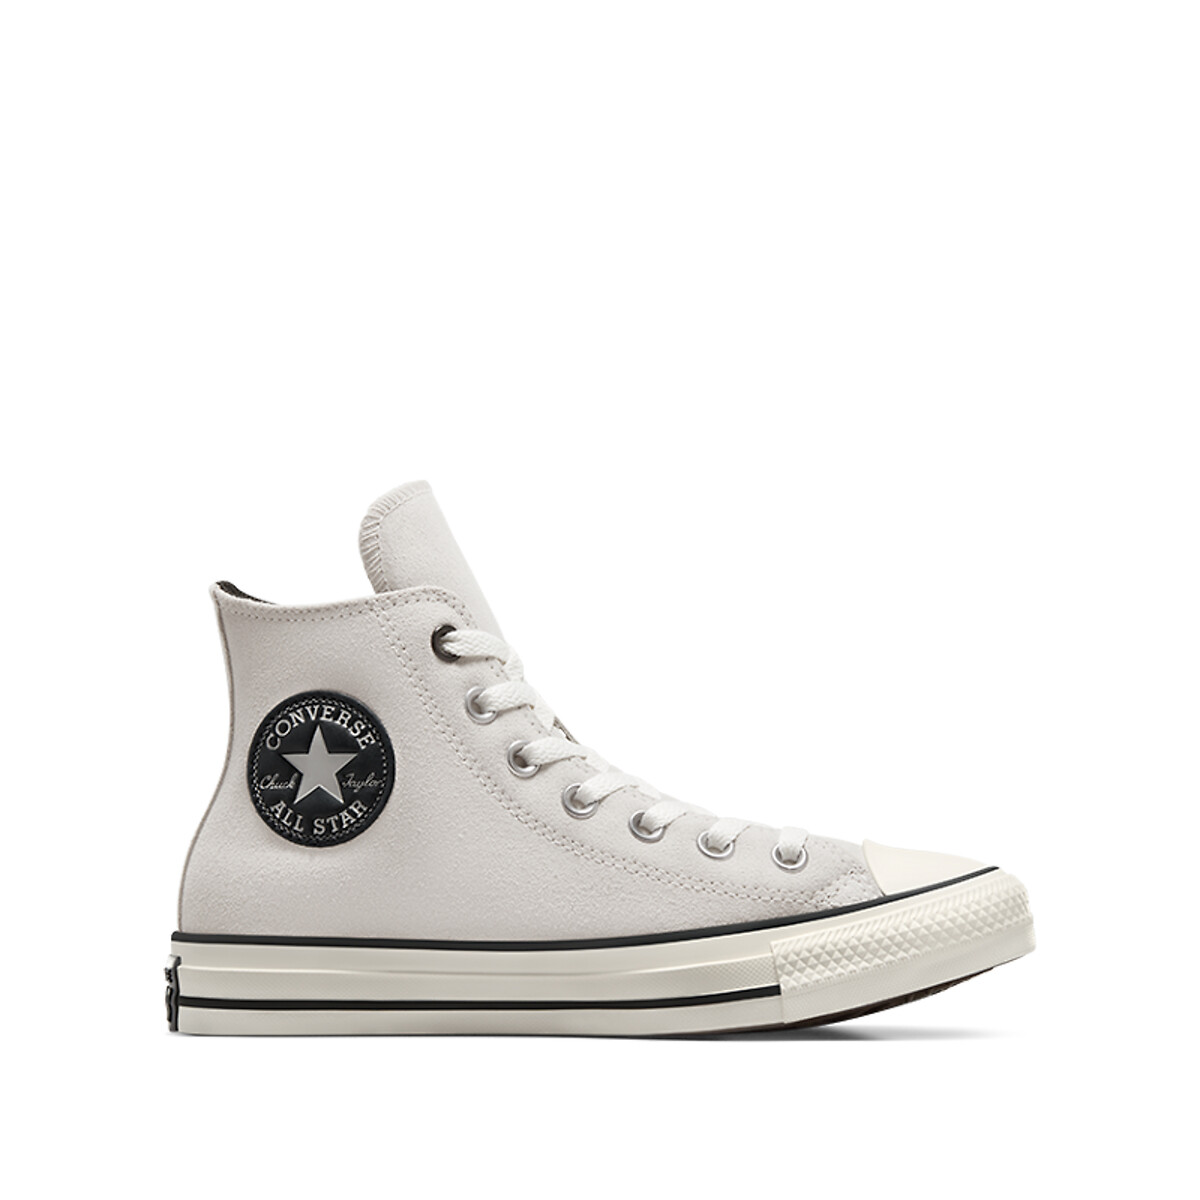 Sneakers All Star Hi Counter Climate von Converse